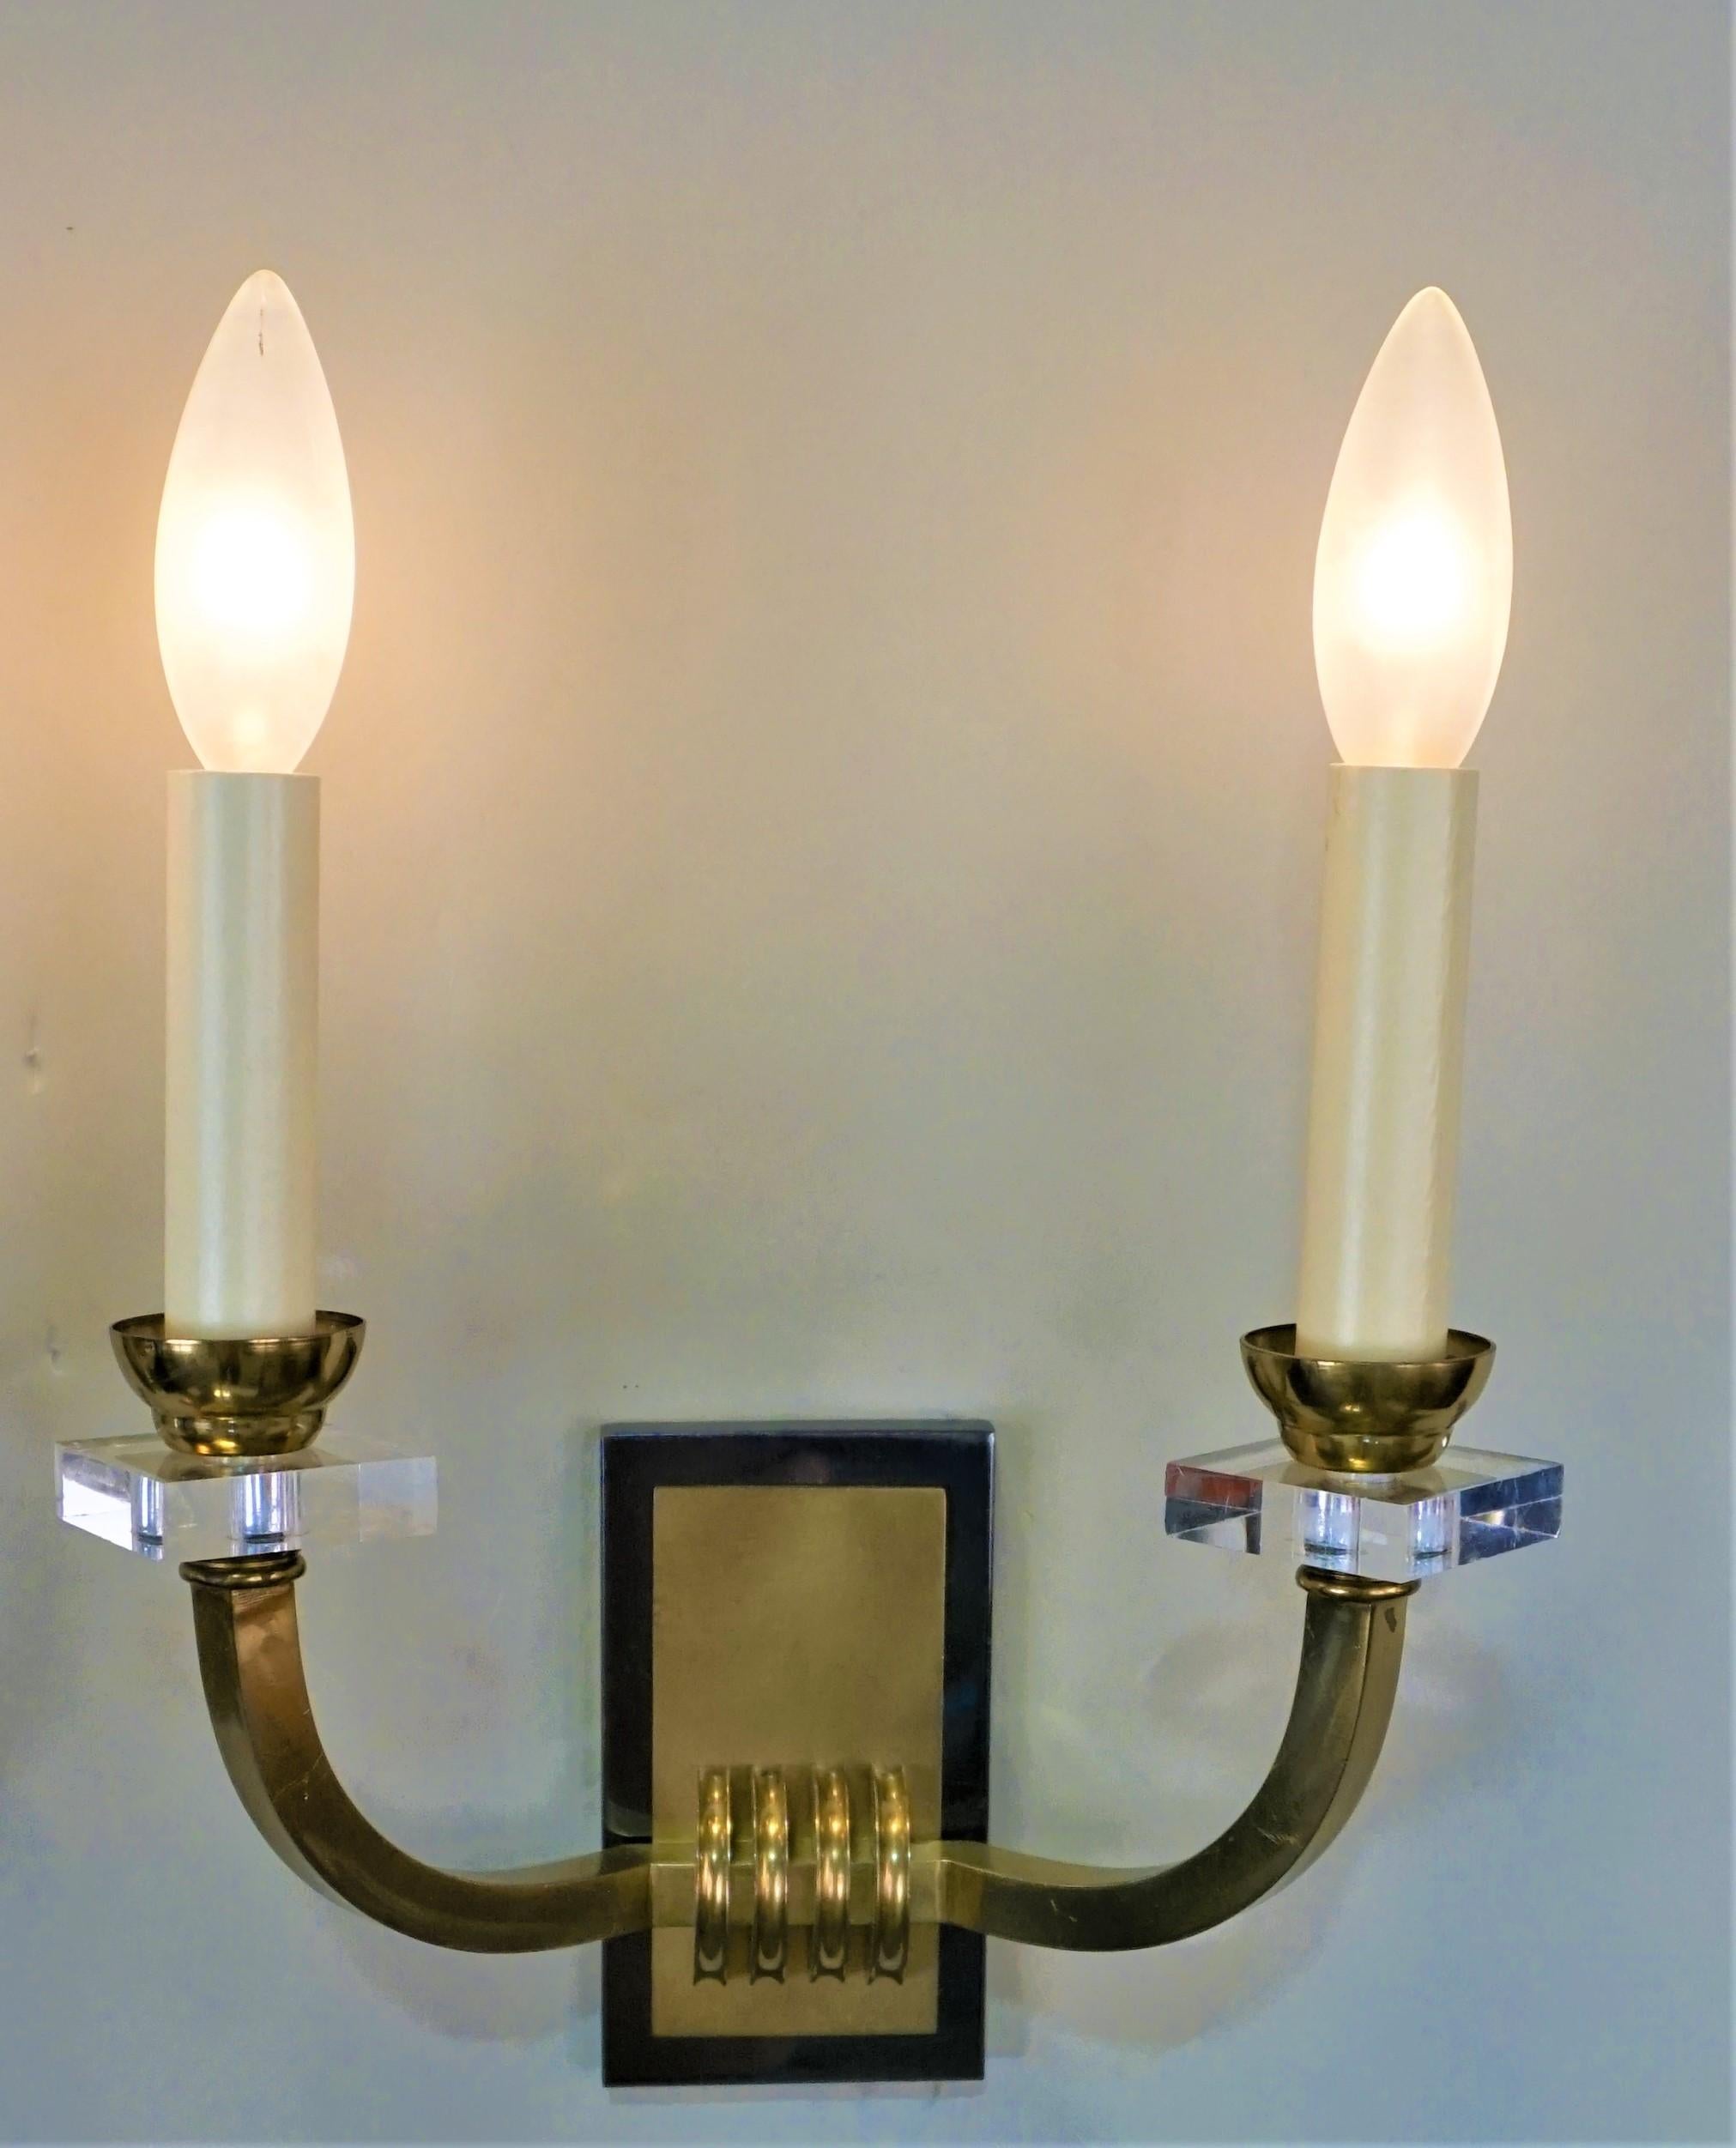 Simple but elegant pair of double arm bronze and oxidized wall sconces by world renowned modernist designer Jacques Adnet.
Measurement is without lampshade.
The backplate is 2.75